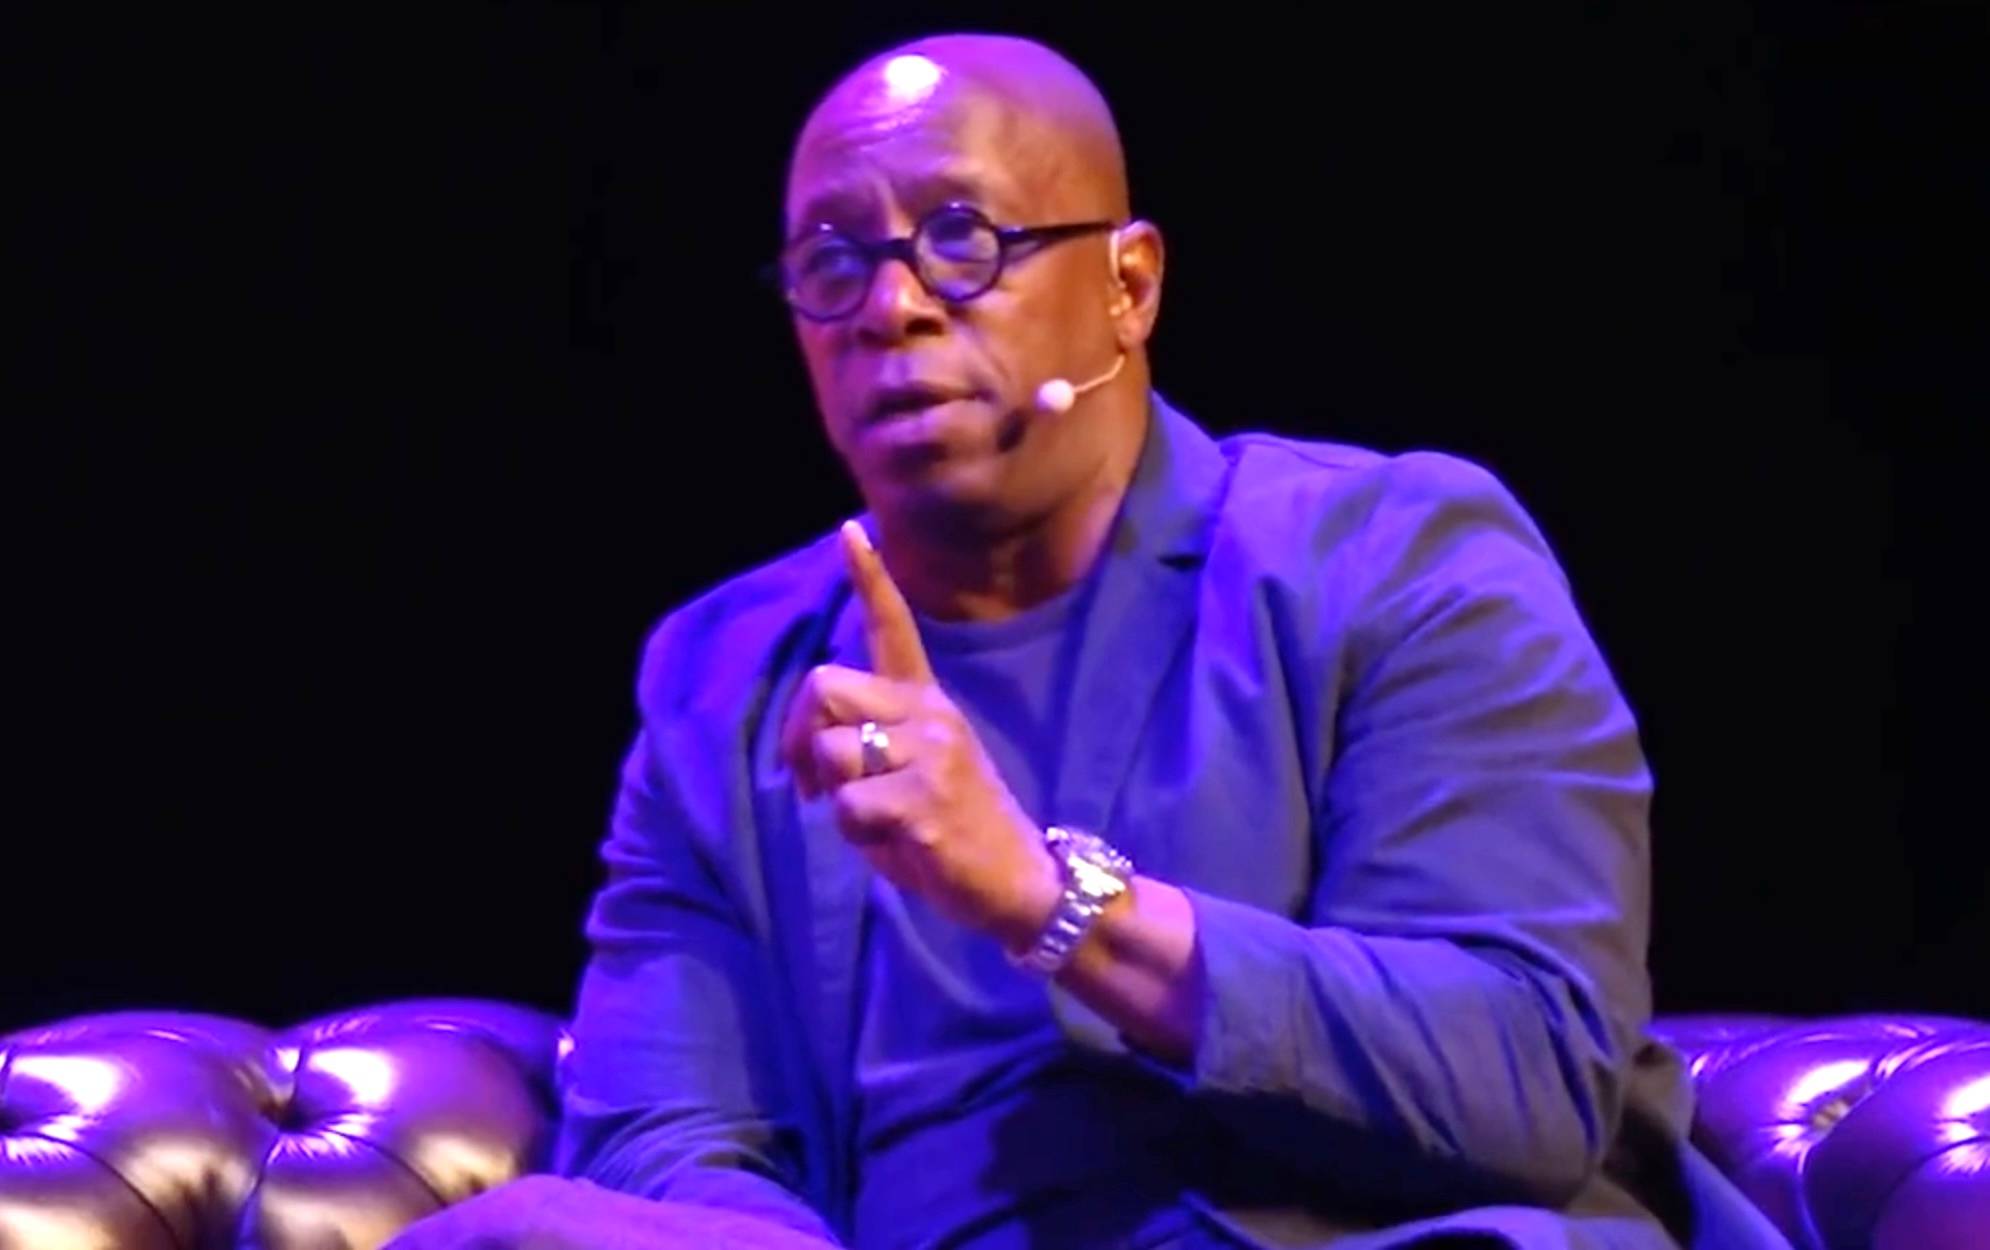 Ian Wright’s comments about Liverpool and the Premier League have gone viral